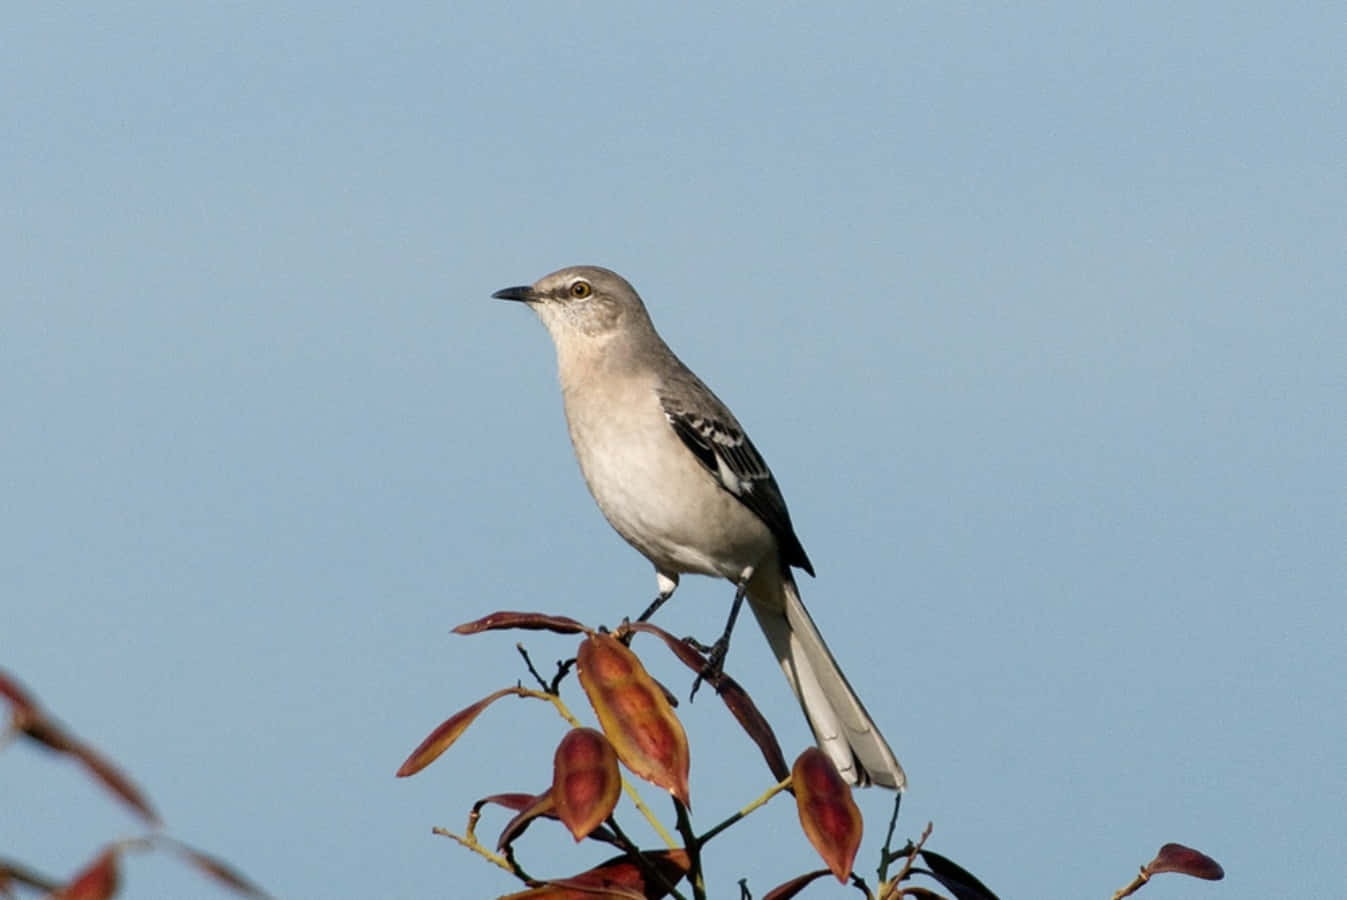 An American Mockingbird perched on a branch